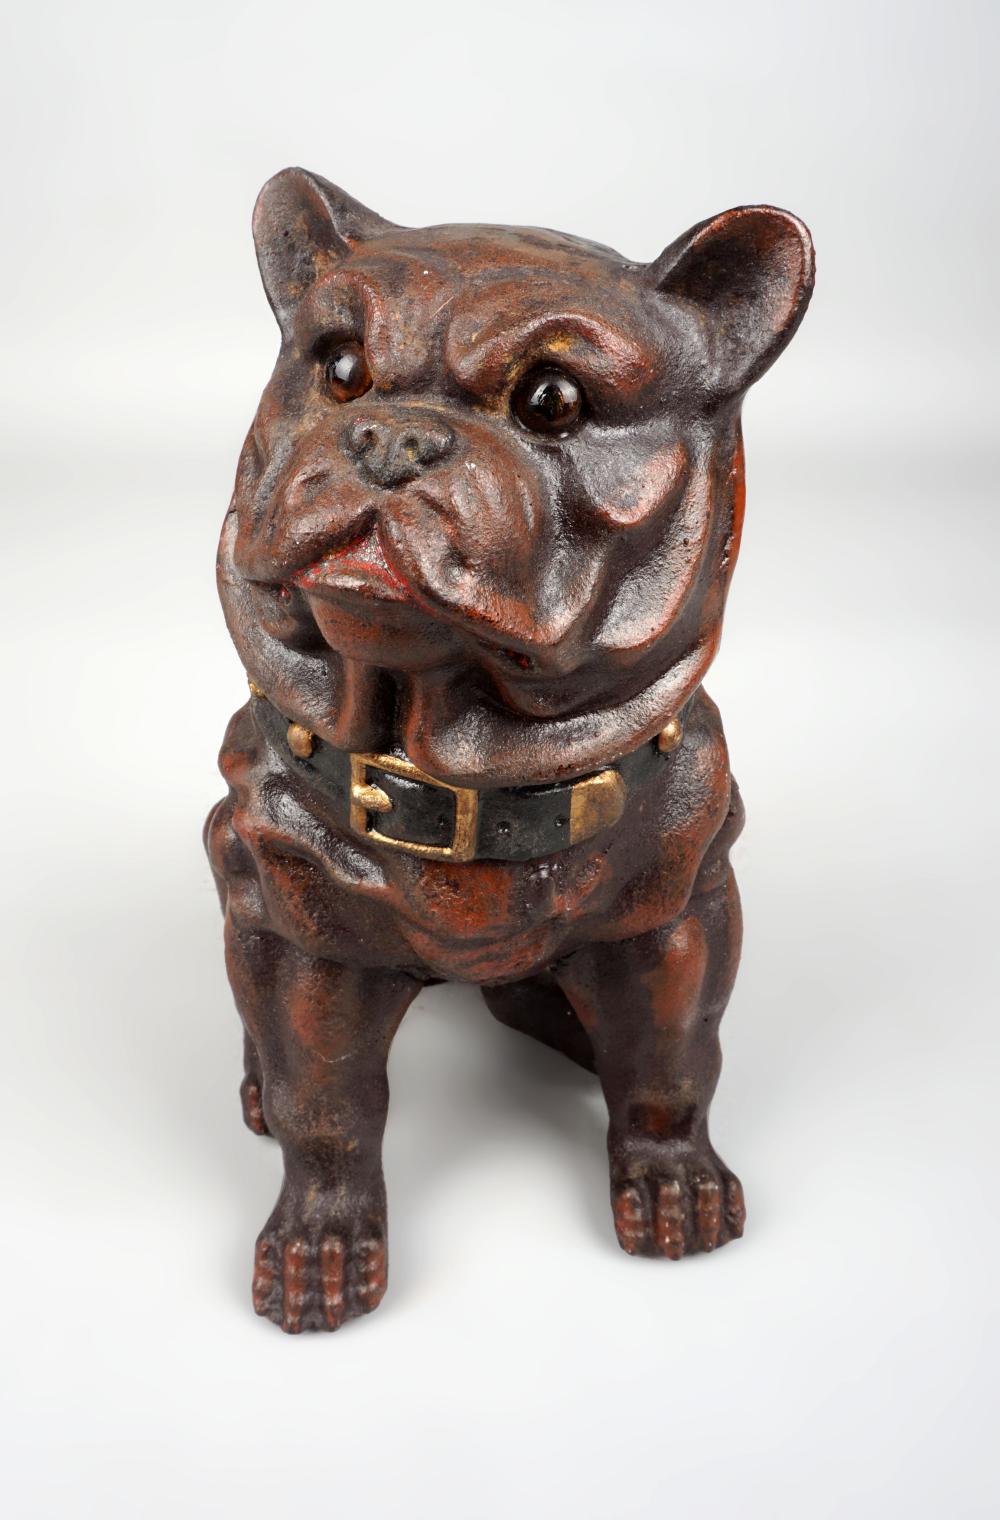 CAST IRON PIGGY BANK IN THE FORM 2ebe75